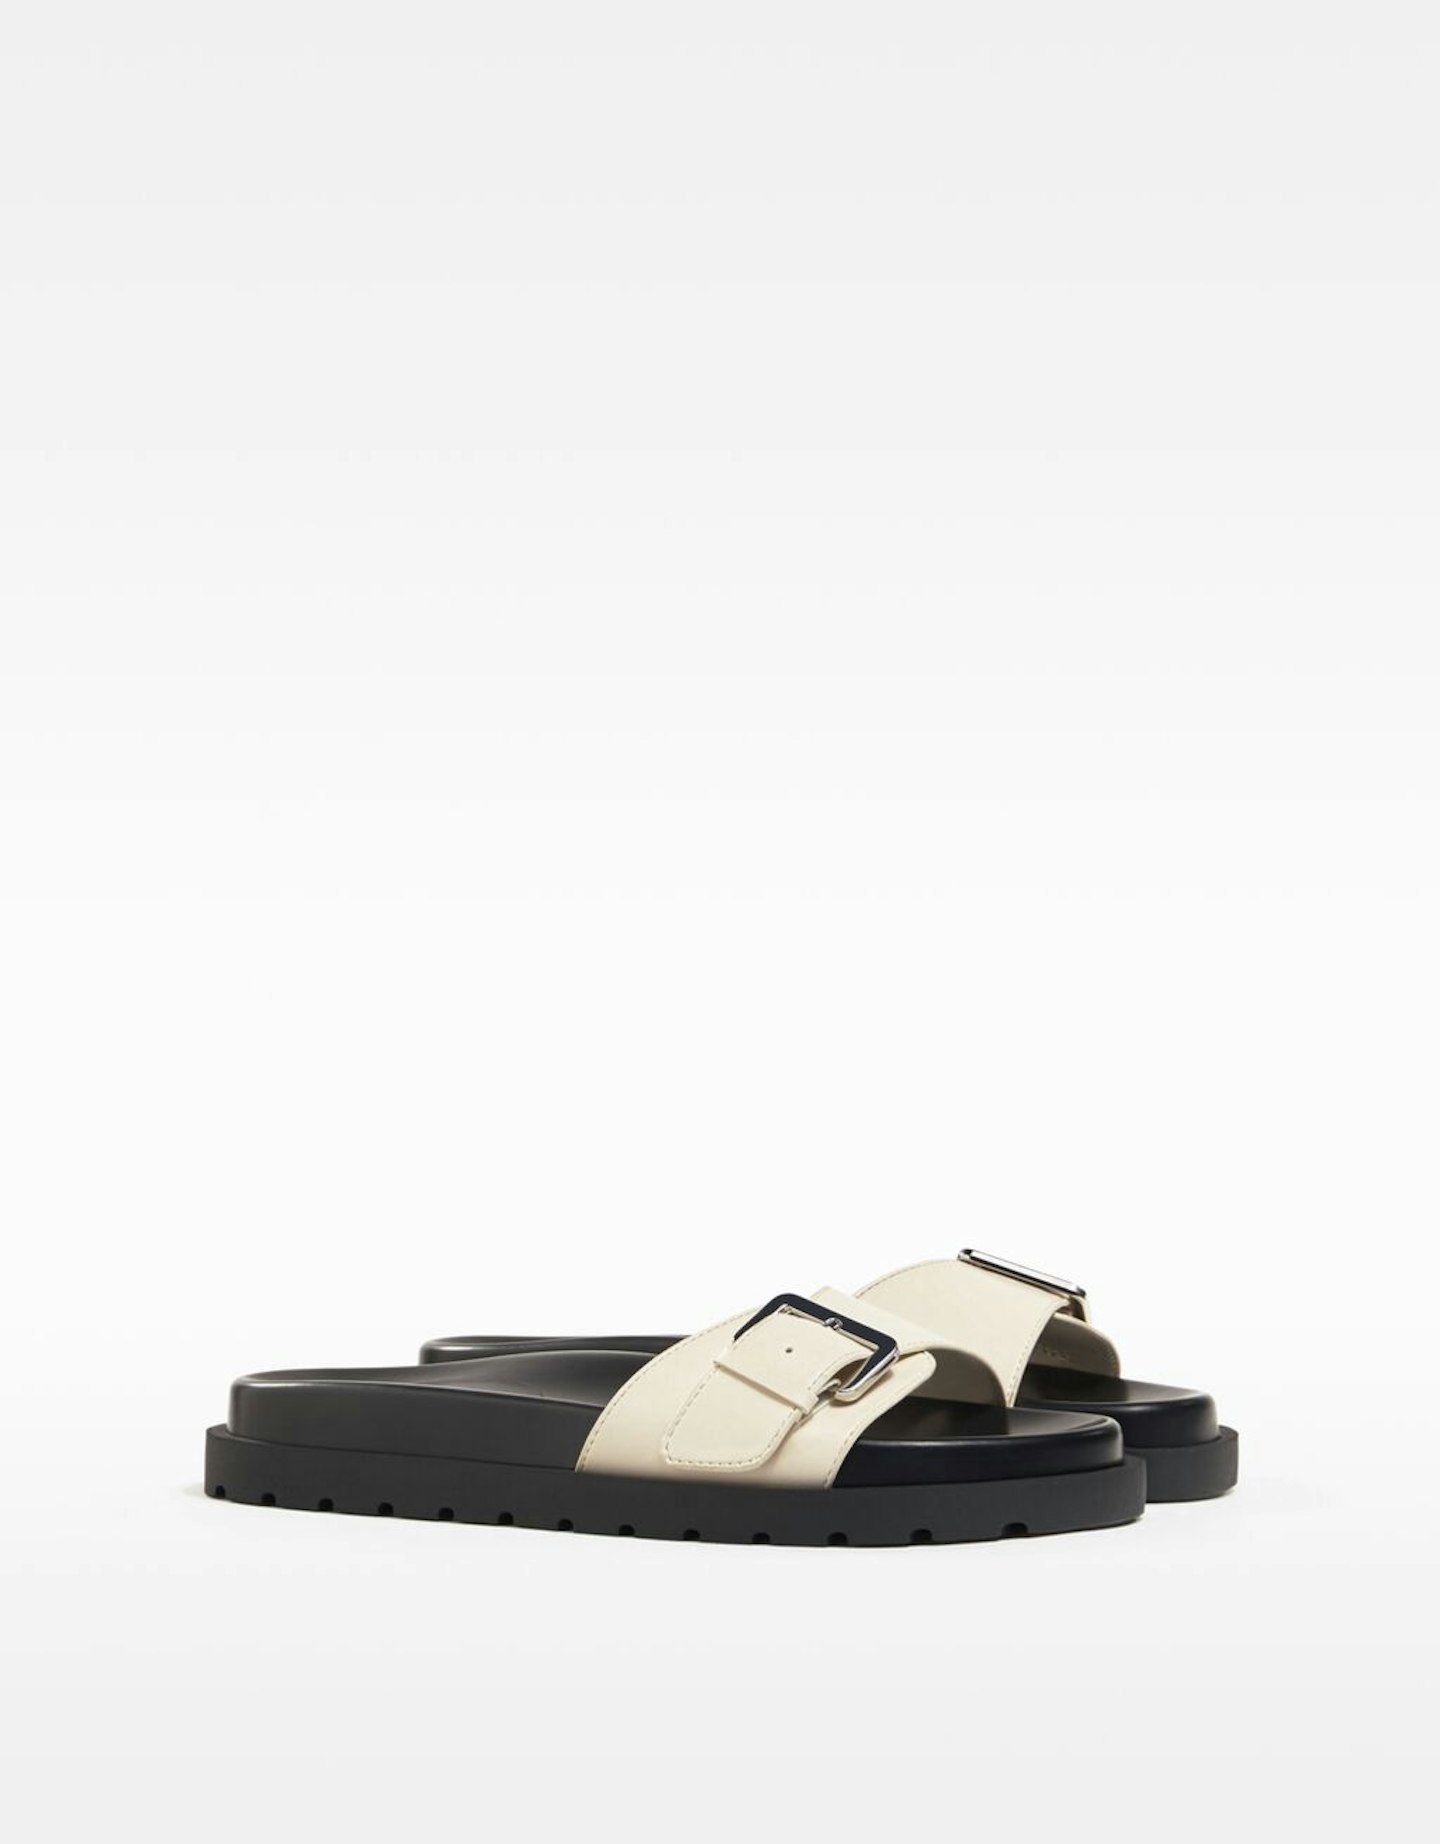 Bershka, Flat Sandals With Buckle, WAS £19.99 NOW £11.99